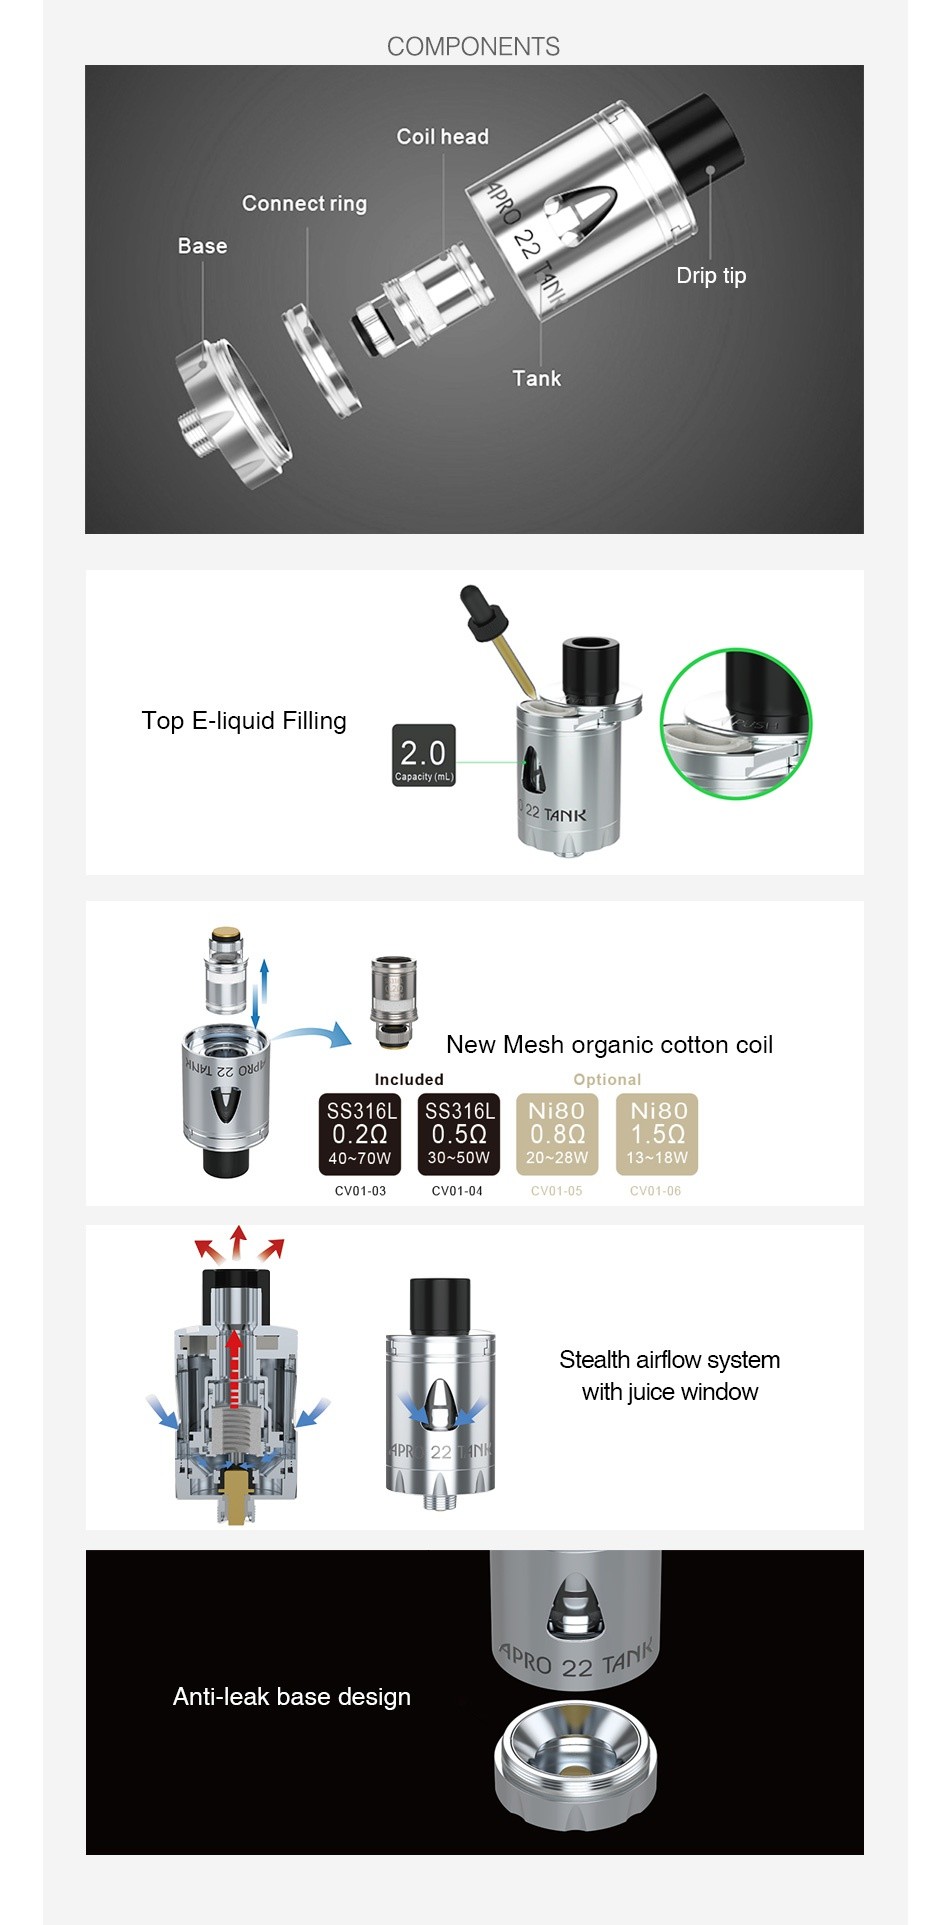 UD Apro 22 Subohm Tank 2ml COMPONENTS Coil head Connect ring Base Drip Tank Top E liquid Filling 2 0 TANK   New Mesh organic cotton coi Included Optional S316L SS316L Ni80 Nico 0 290 590891 59 30 50W20 28W 13 18W CV01 05 Stealth airflow system with juice window RO 22 TAI Anti leak base design